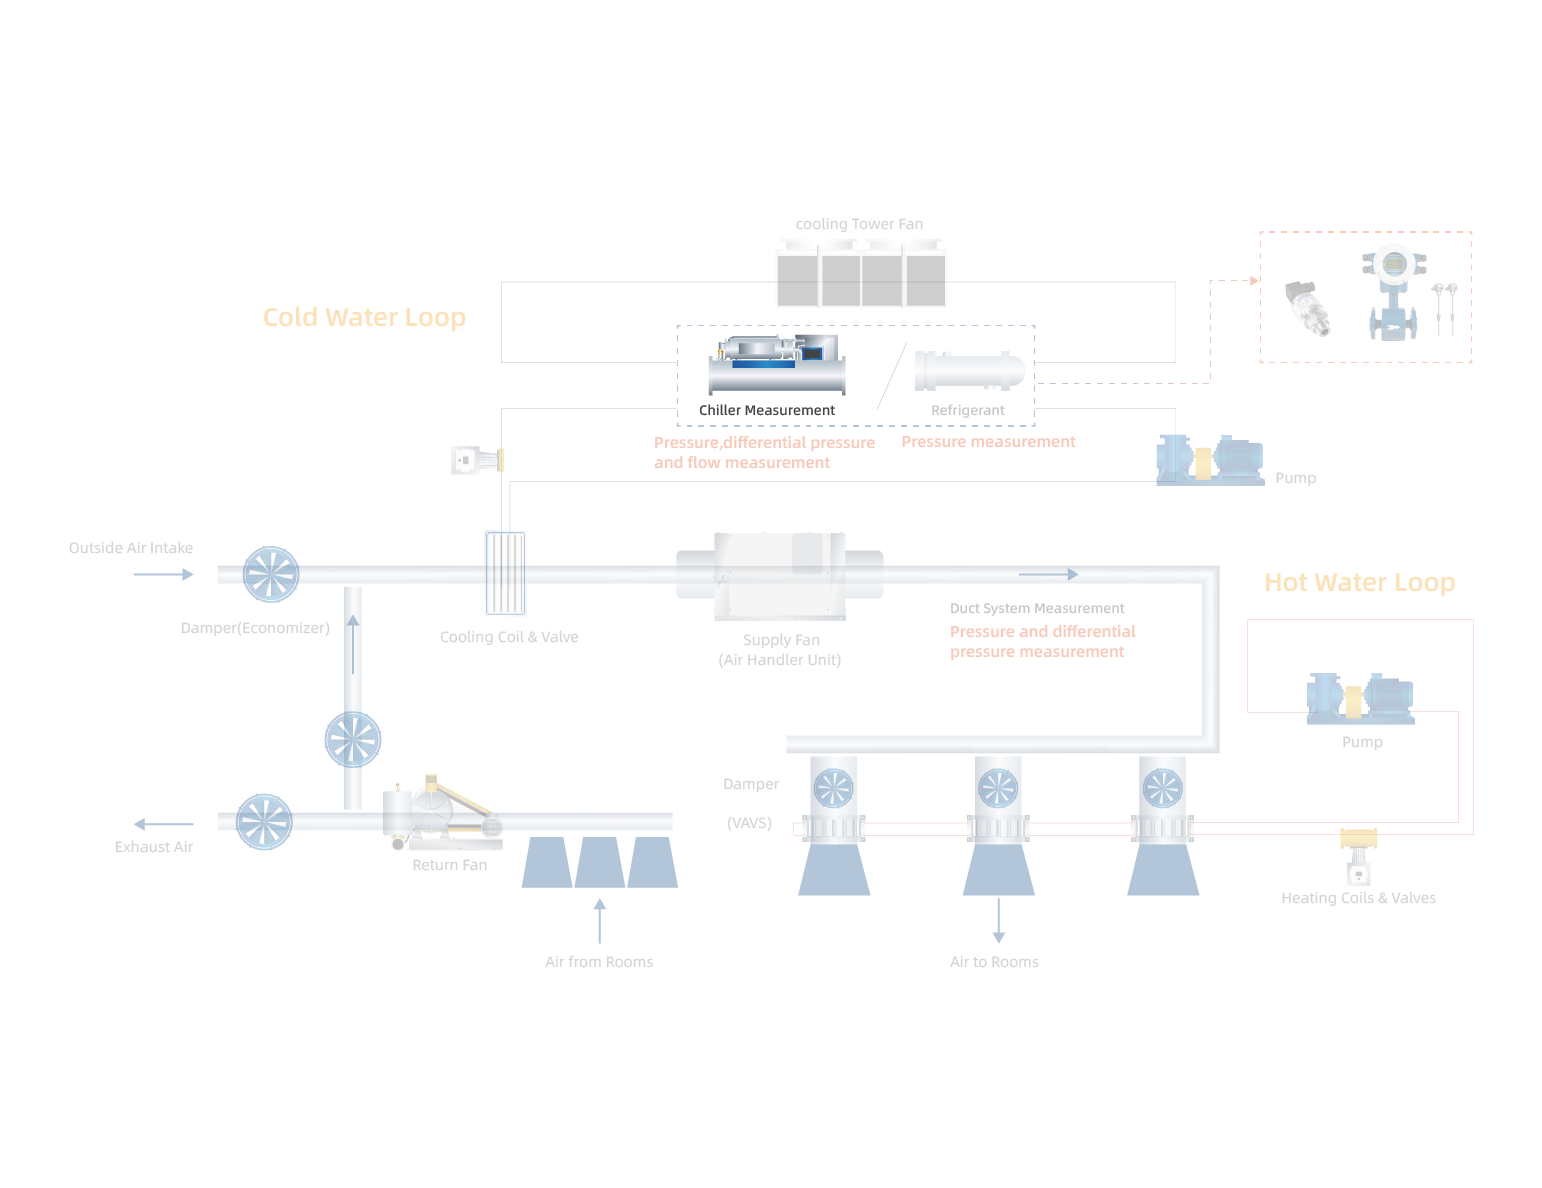 Pressure and flow measurement in Chiller